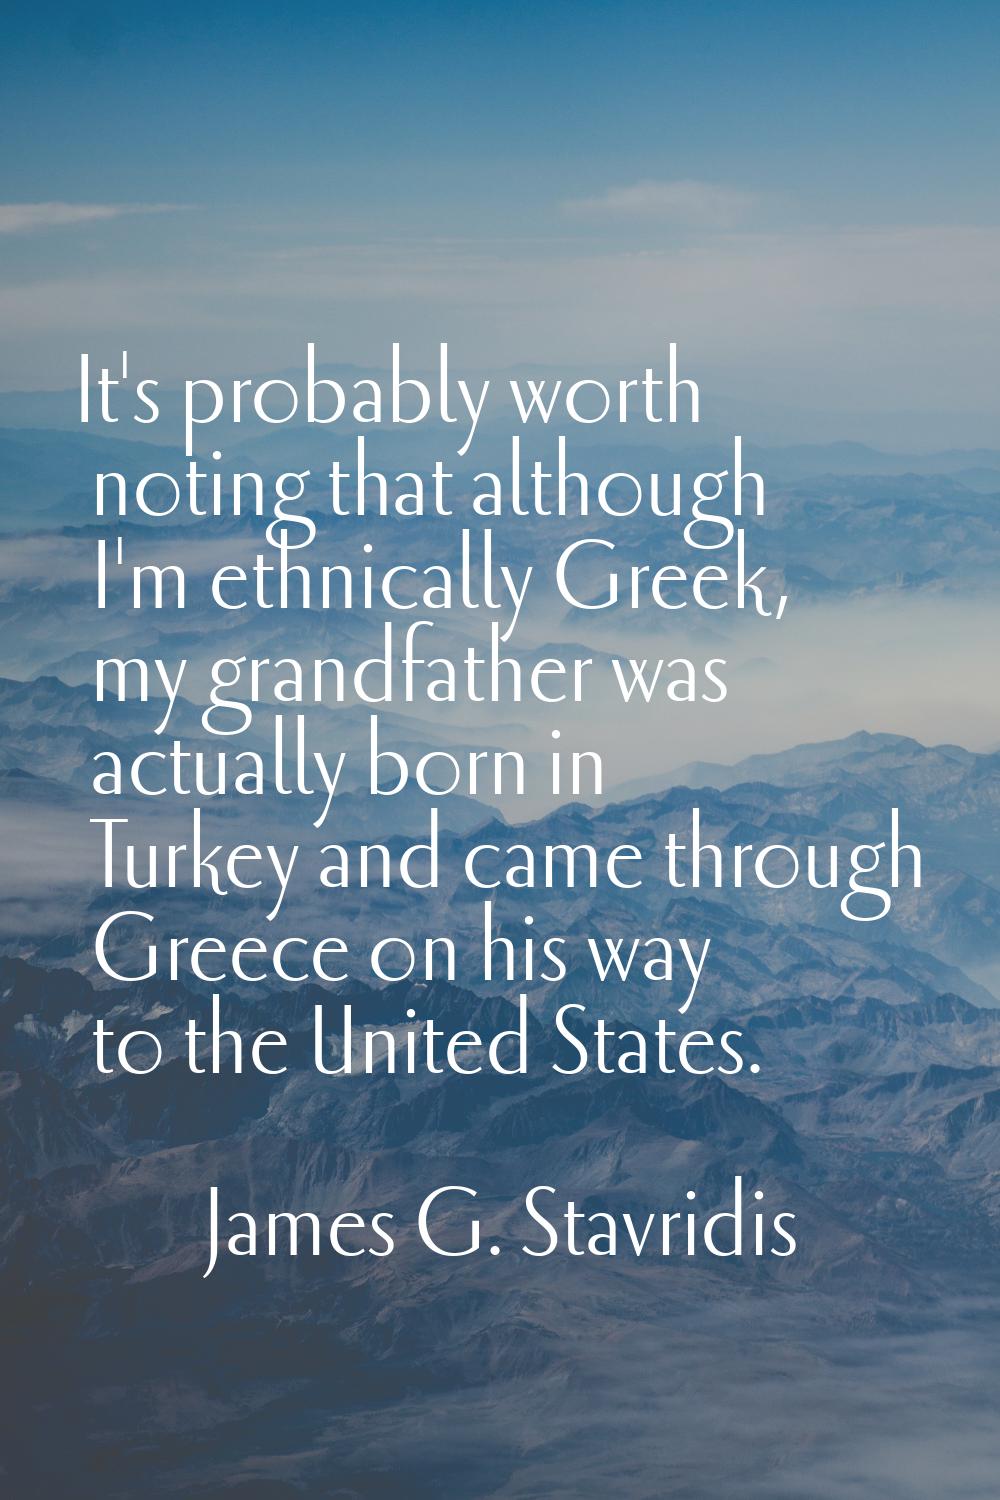 It's probably worth noting that although I'm ethnically Greek, my grandfather was actually born in 